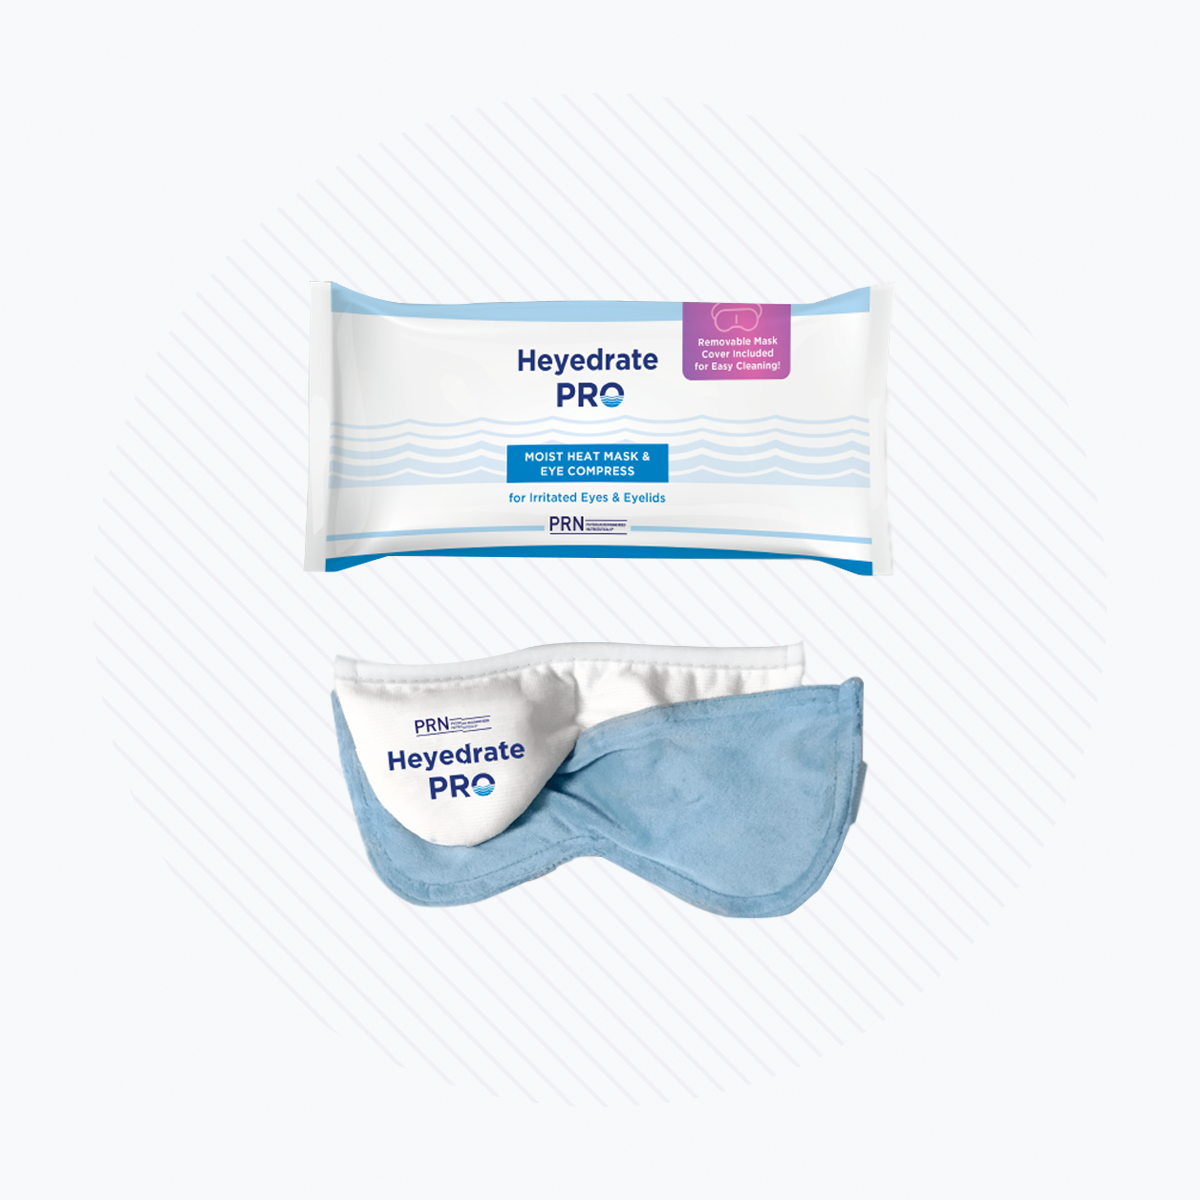 Heyedrate Pro by PRN Heat Mask with Cover for Dry Eyes